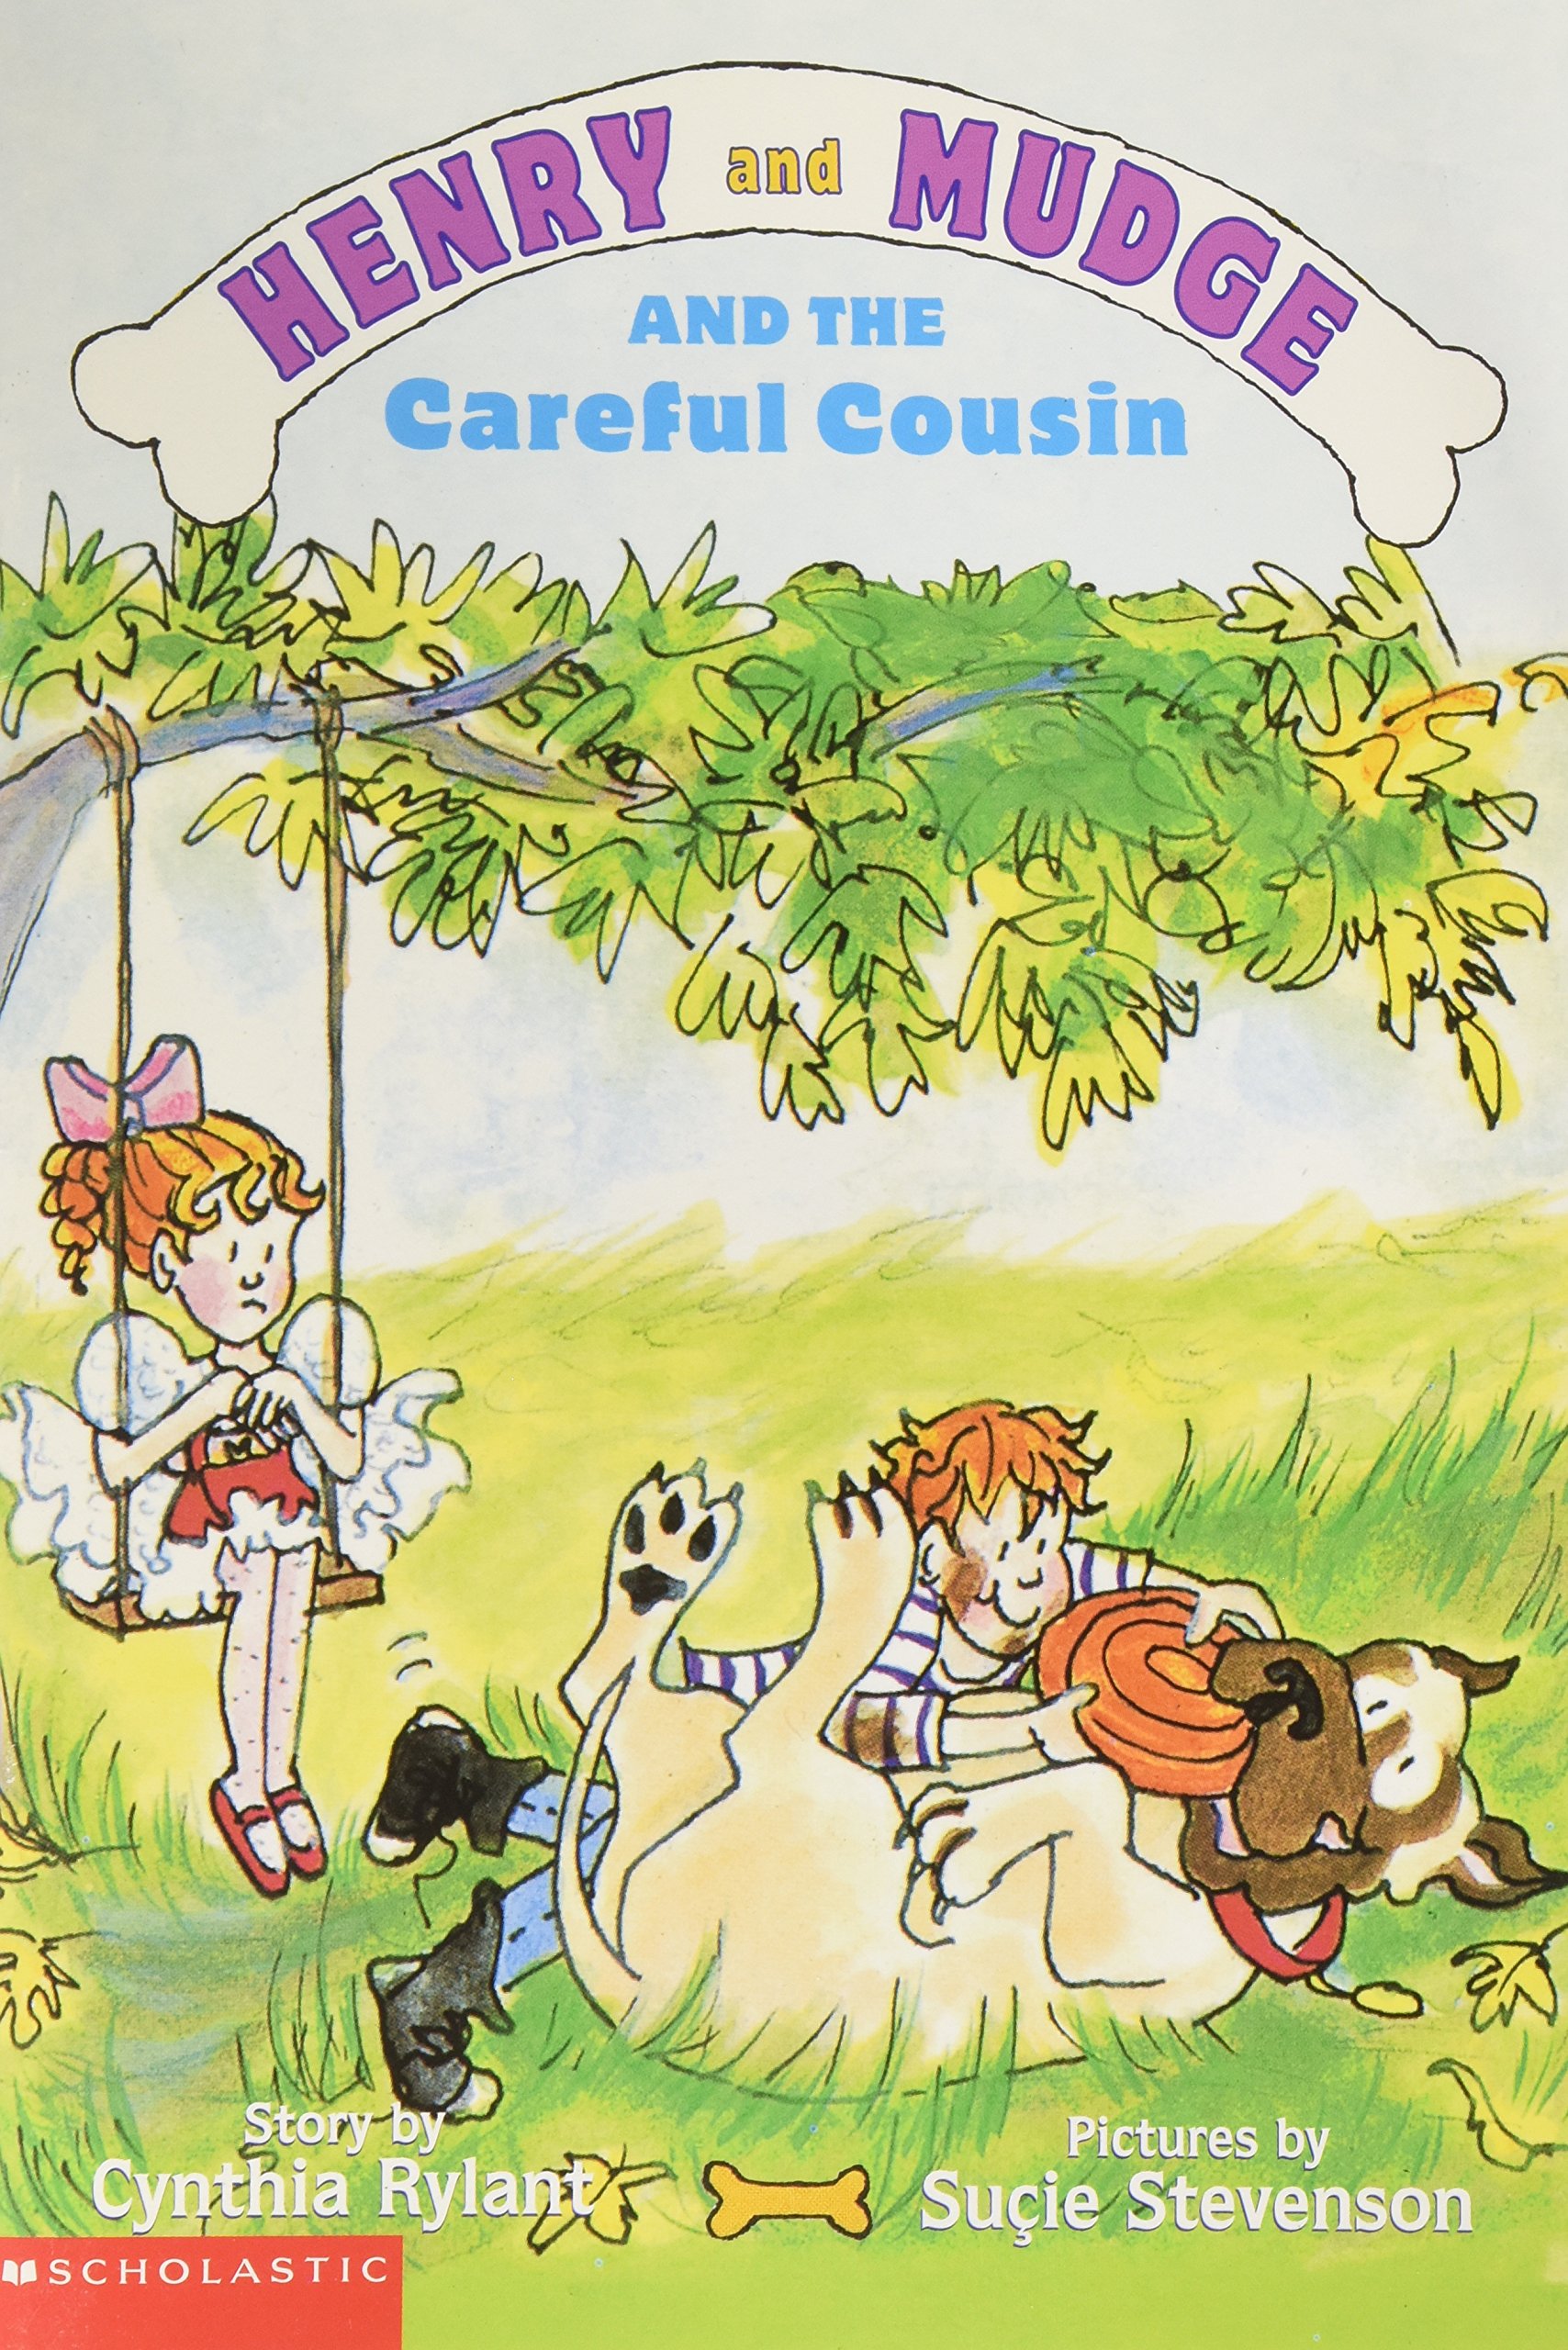 Image for "Henry and Mudge and the Careful Cousin"